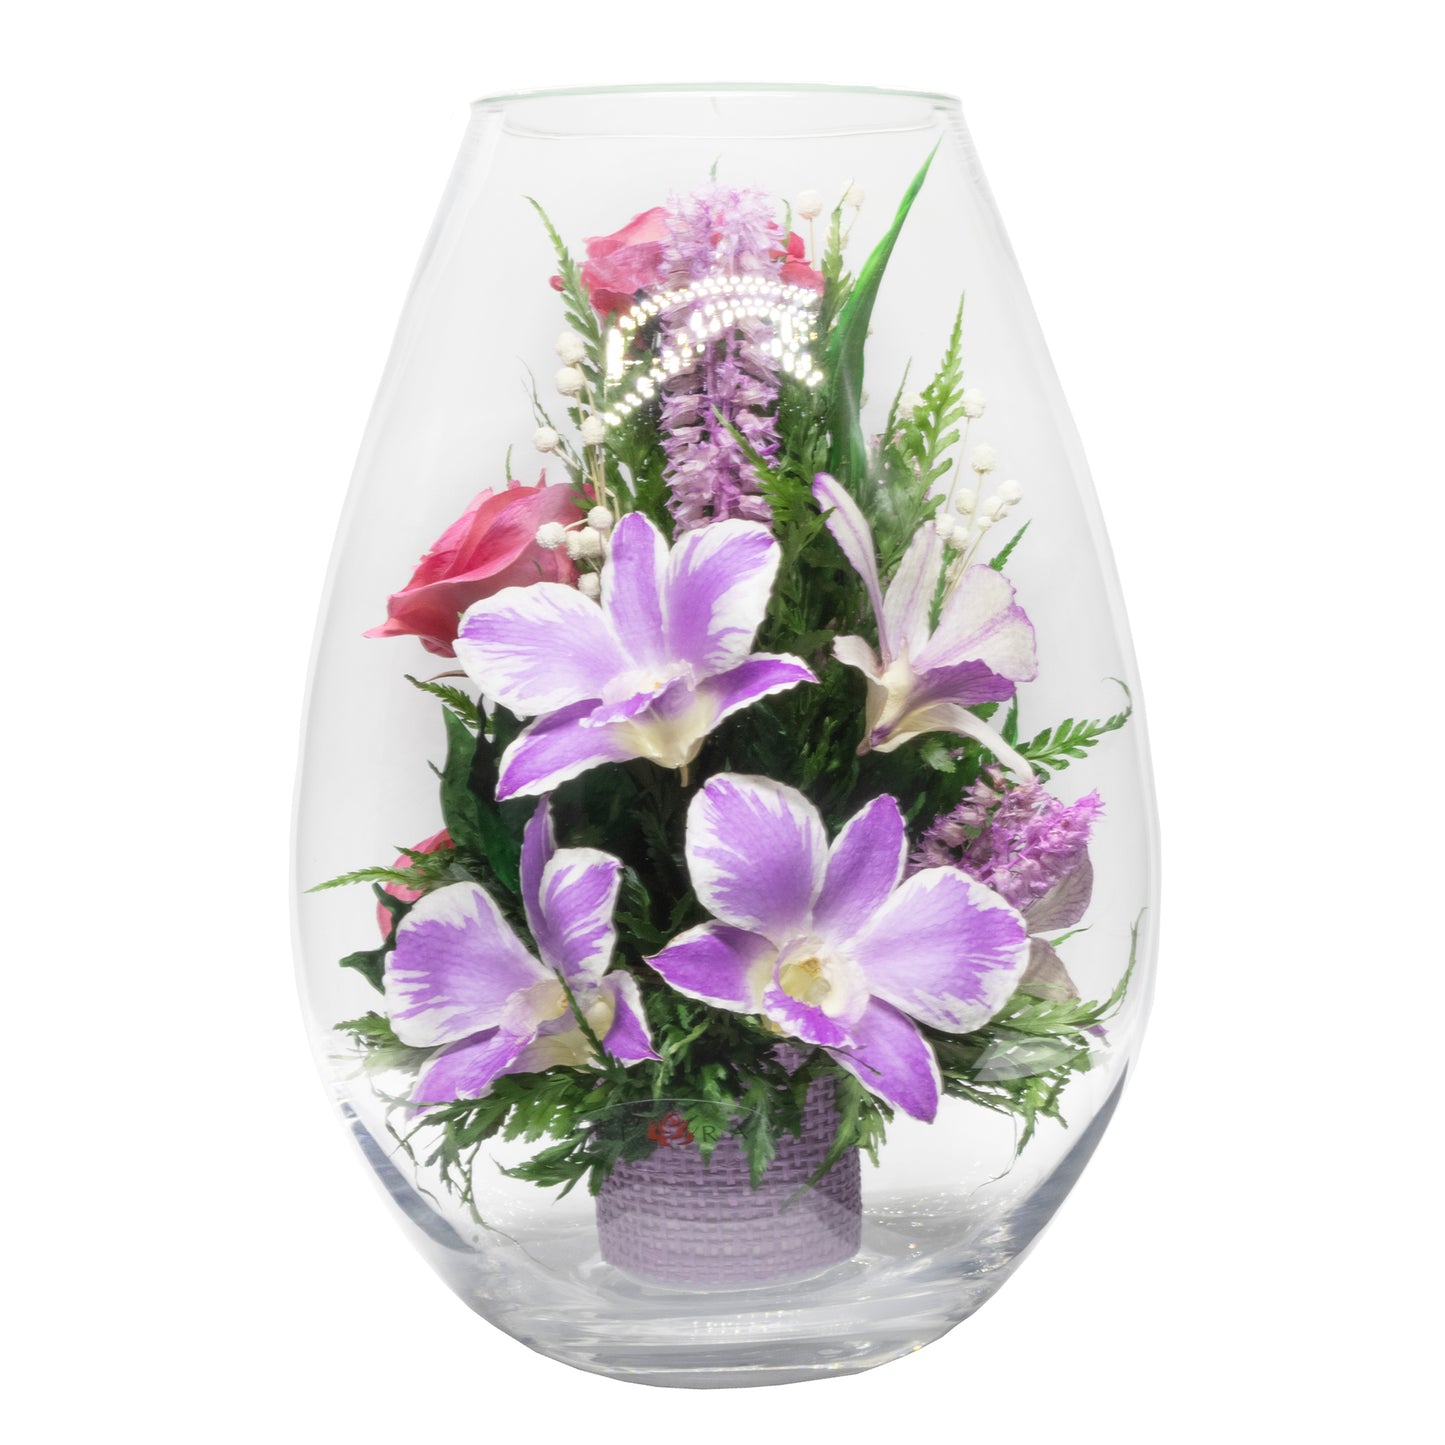 71843 Long-Lasting Pink Roses, Purple-Striped White & King Dragon Orchids in a Droplet Glass Vase